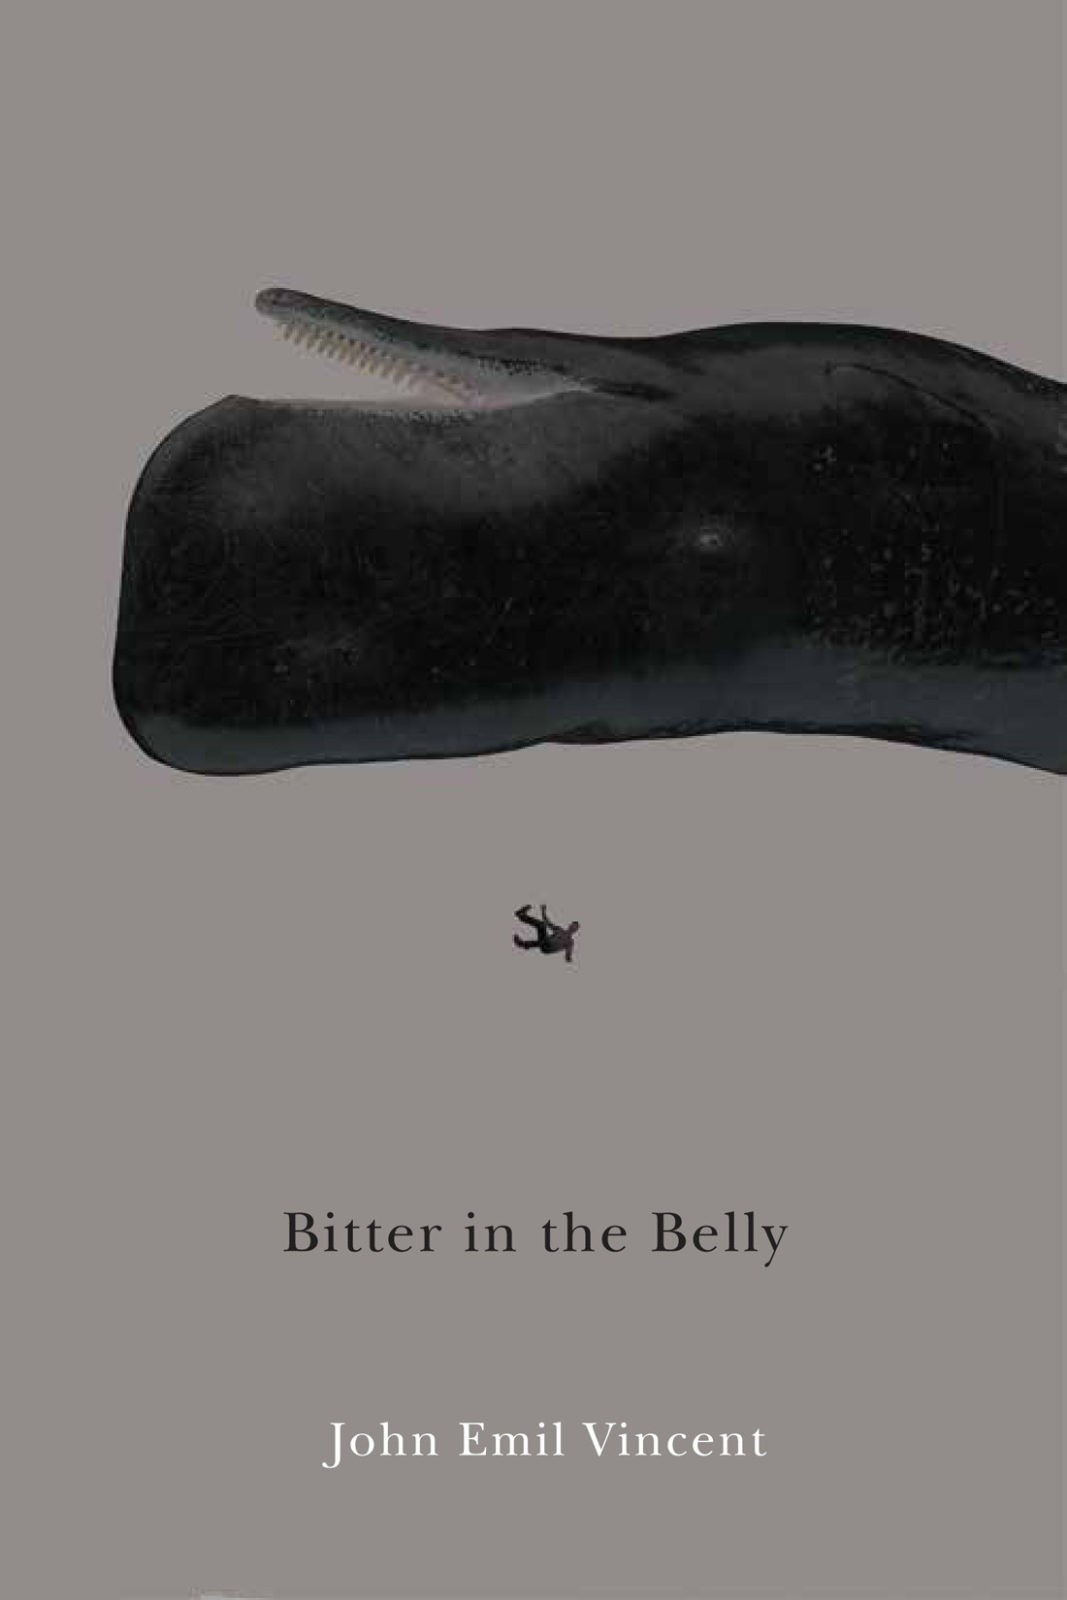 John Emil Vincent’s Bitter in the Belly